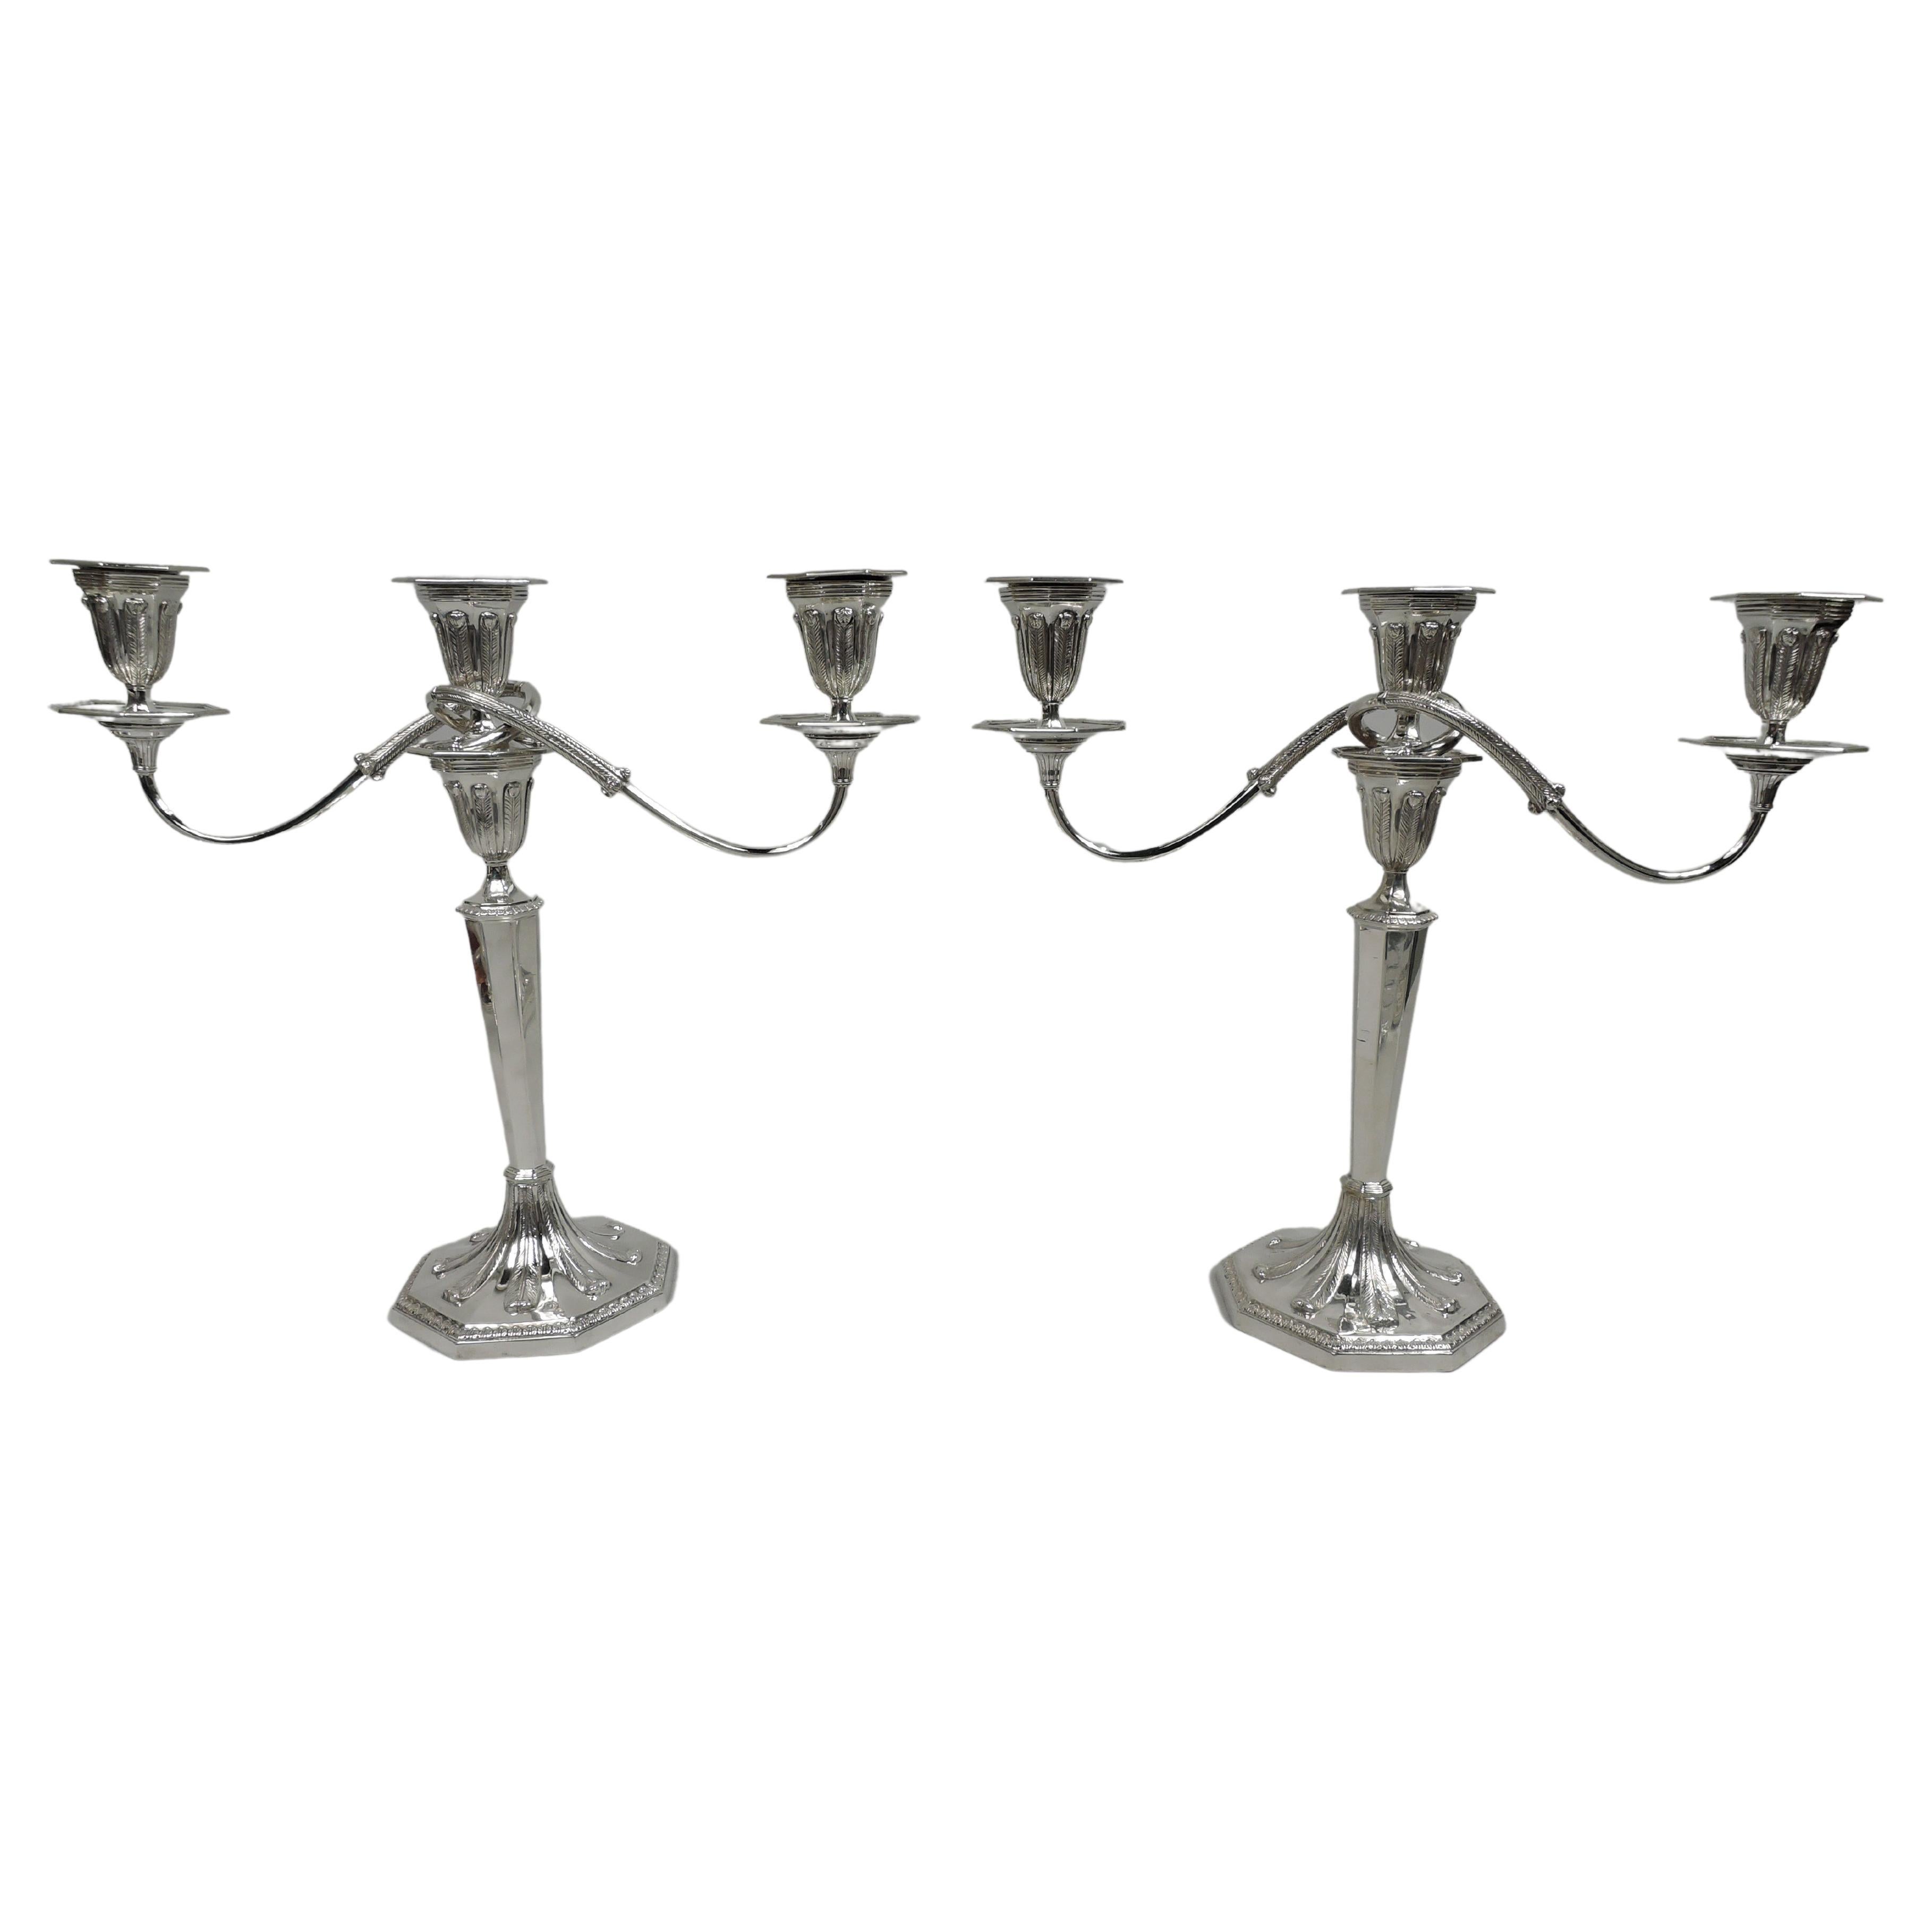 Pair of Antique Tiffany English Neoclassical 3-Light Candelabra For Sale